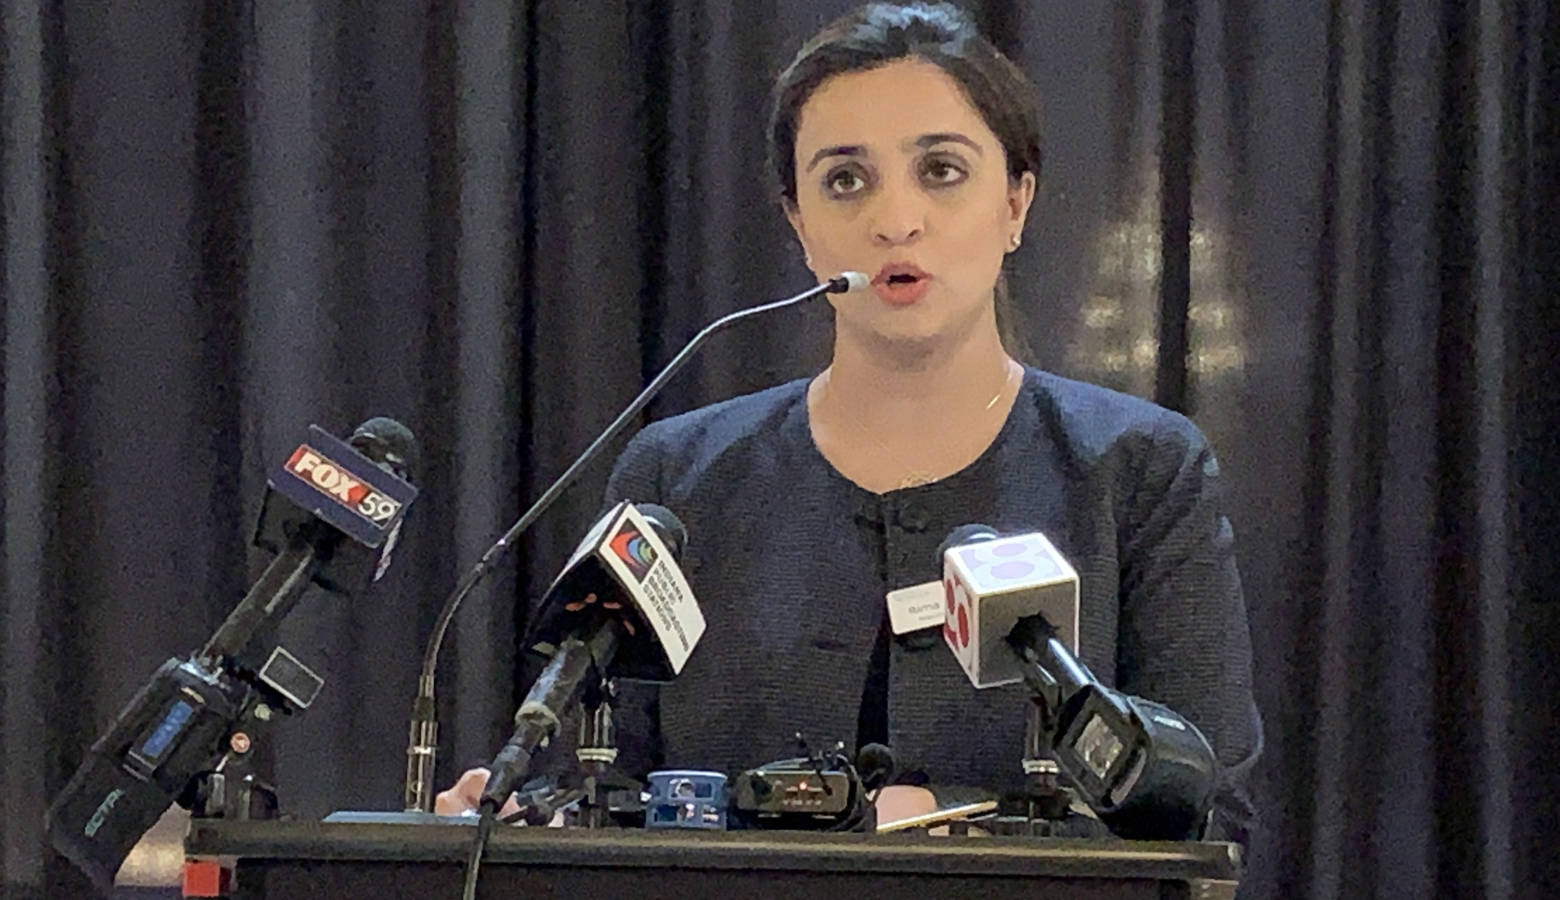 Women4Change Indiana executive director Rima Shahid says leaving sex and gender out of hate crimes legislation is particularly harmful. (Brandon Smith/IPB News)